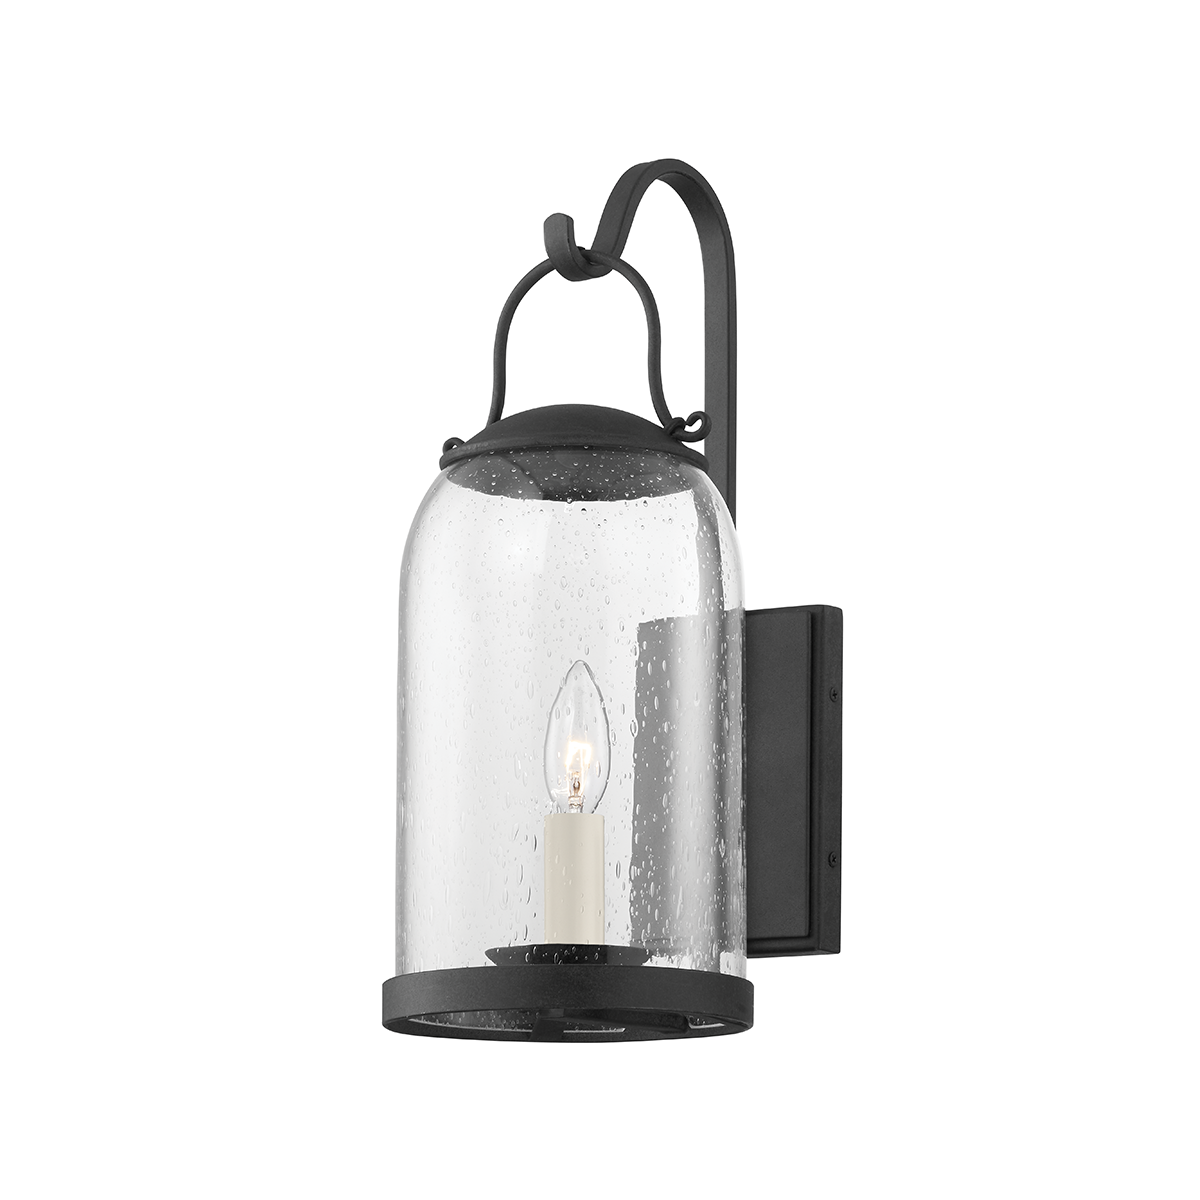 Troy Lighting 1 LIGHT SMALL EXTERIOR WALL SCONCE B5181 Outdoor l Wall Troy Lighting FRENCH IRON  